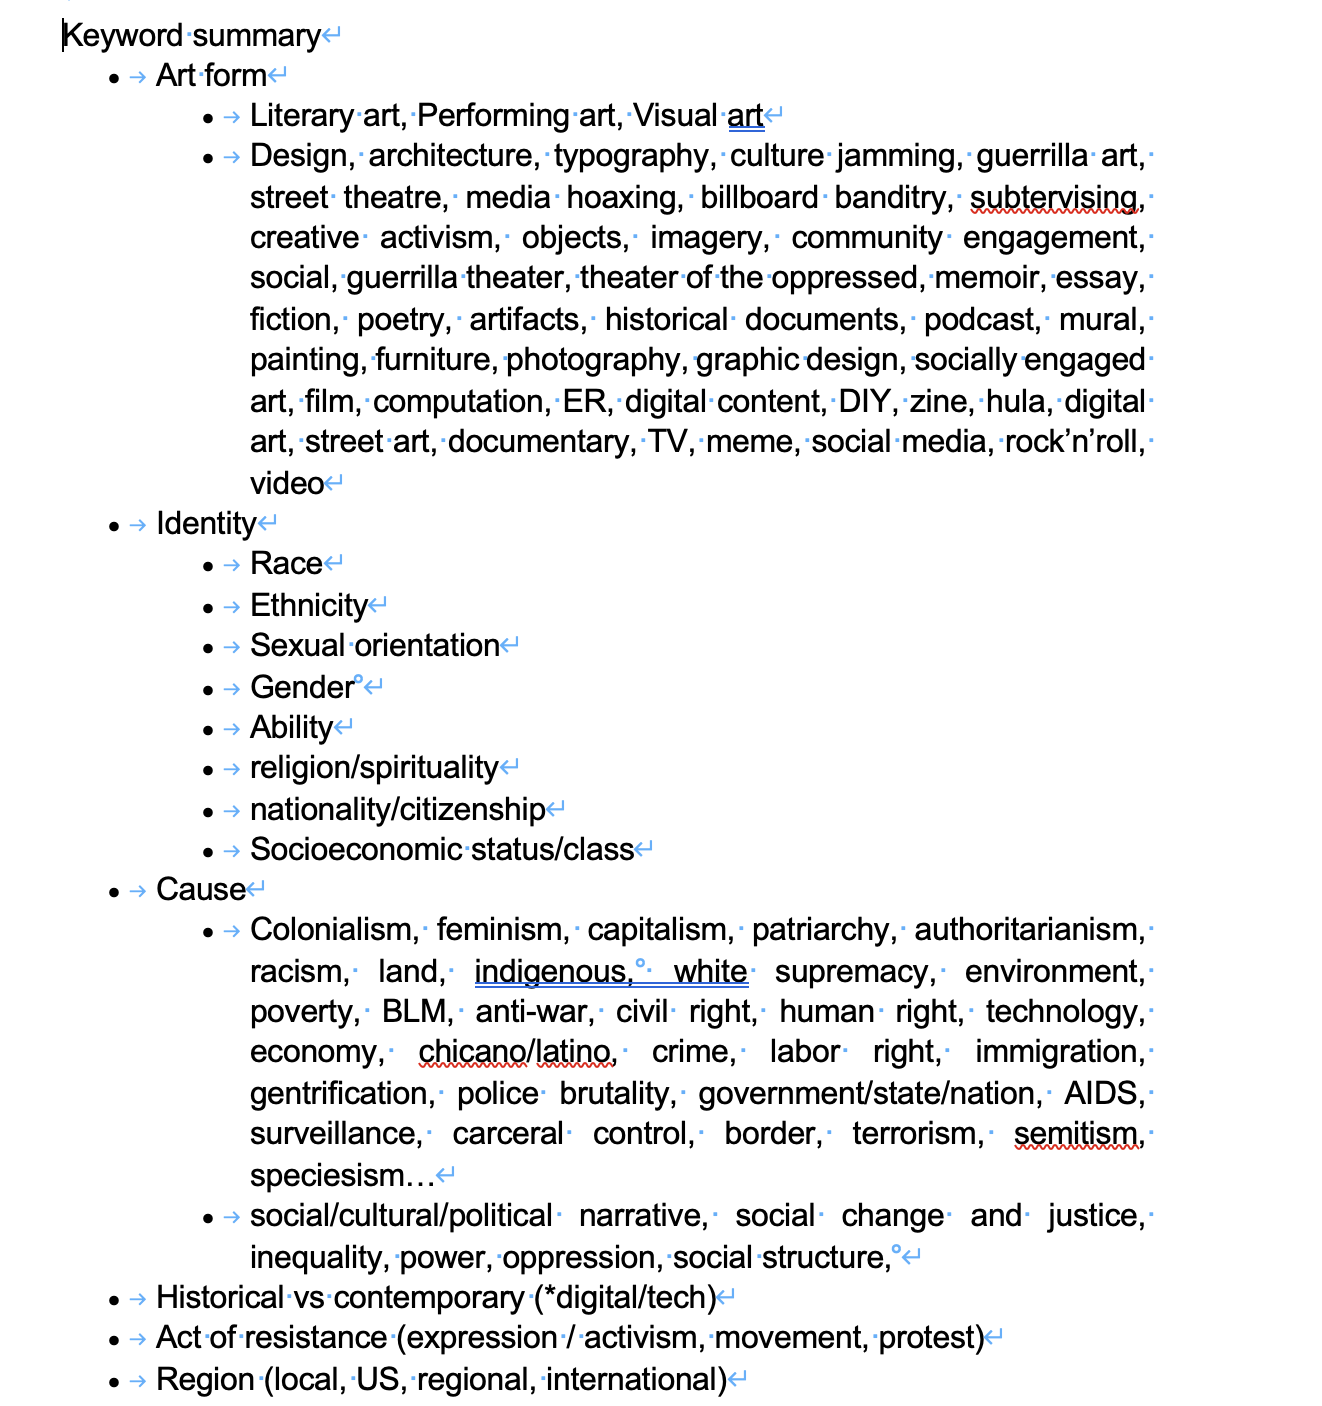 Screenshot of the Word document that contains many keywords from the course descriptions